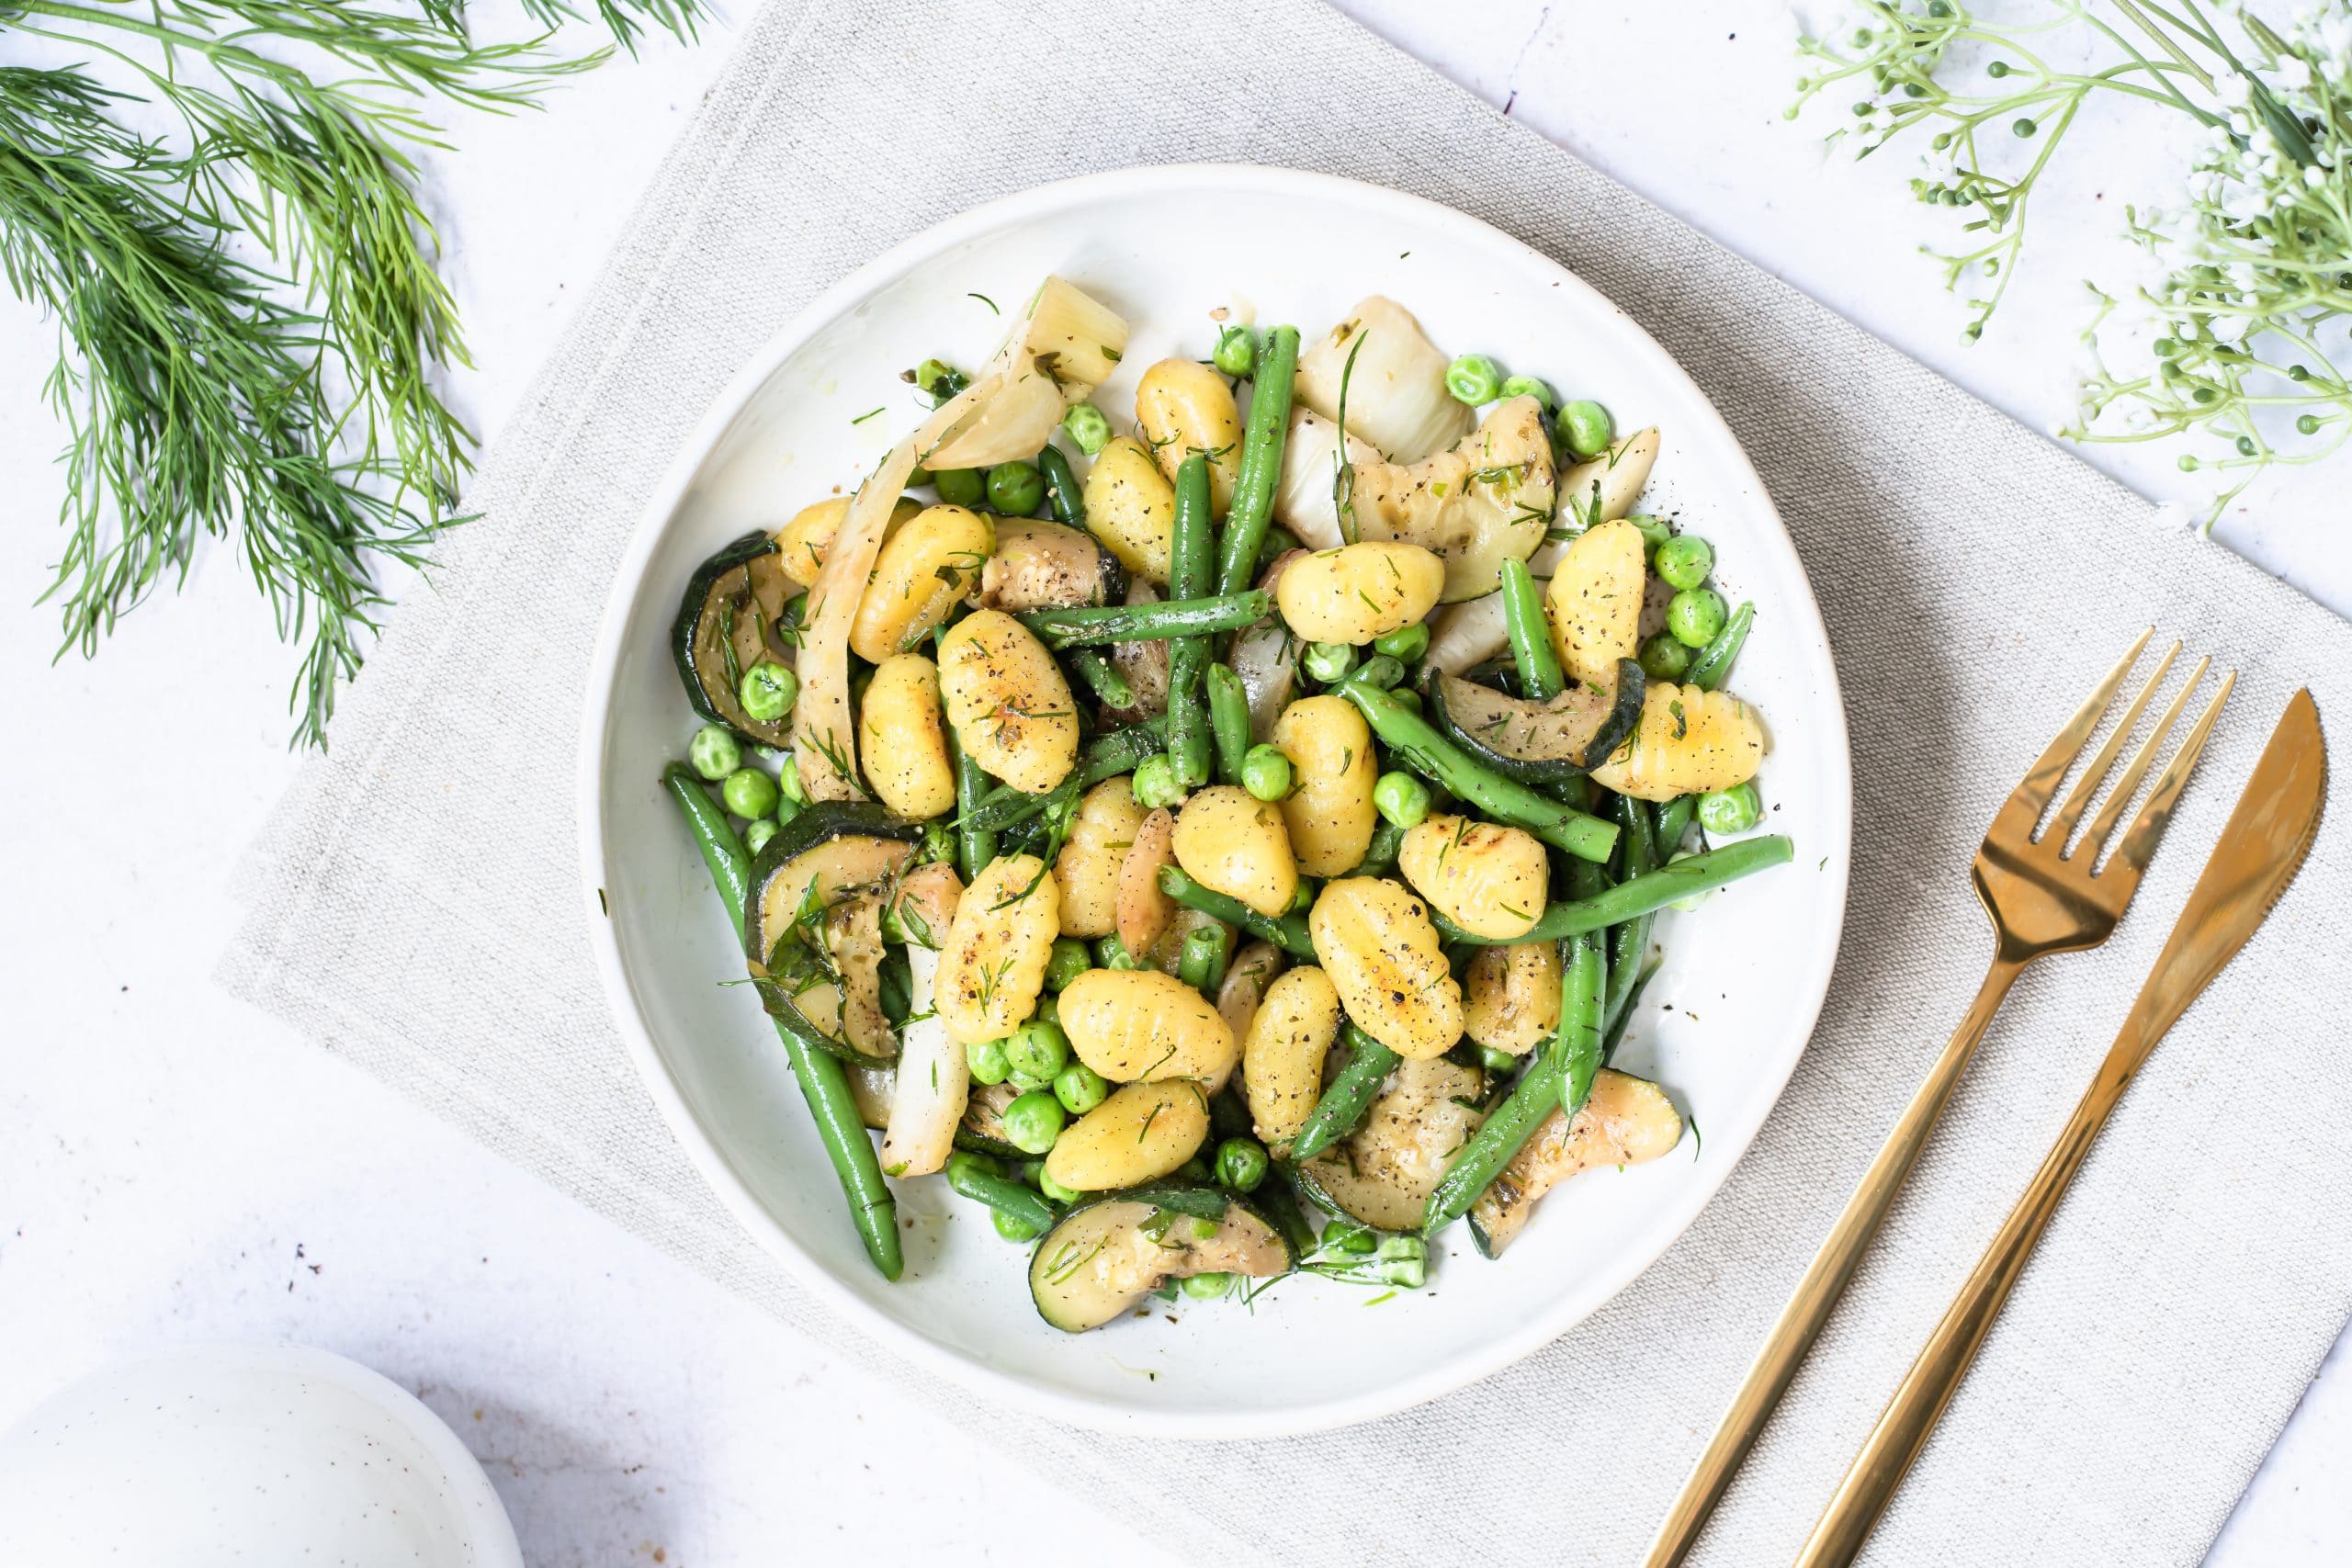 Pan Fried Gnocchi with Green Vegetables